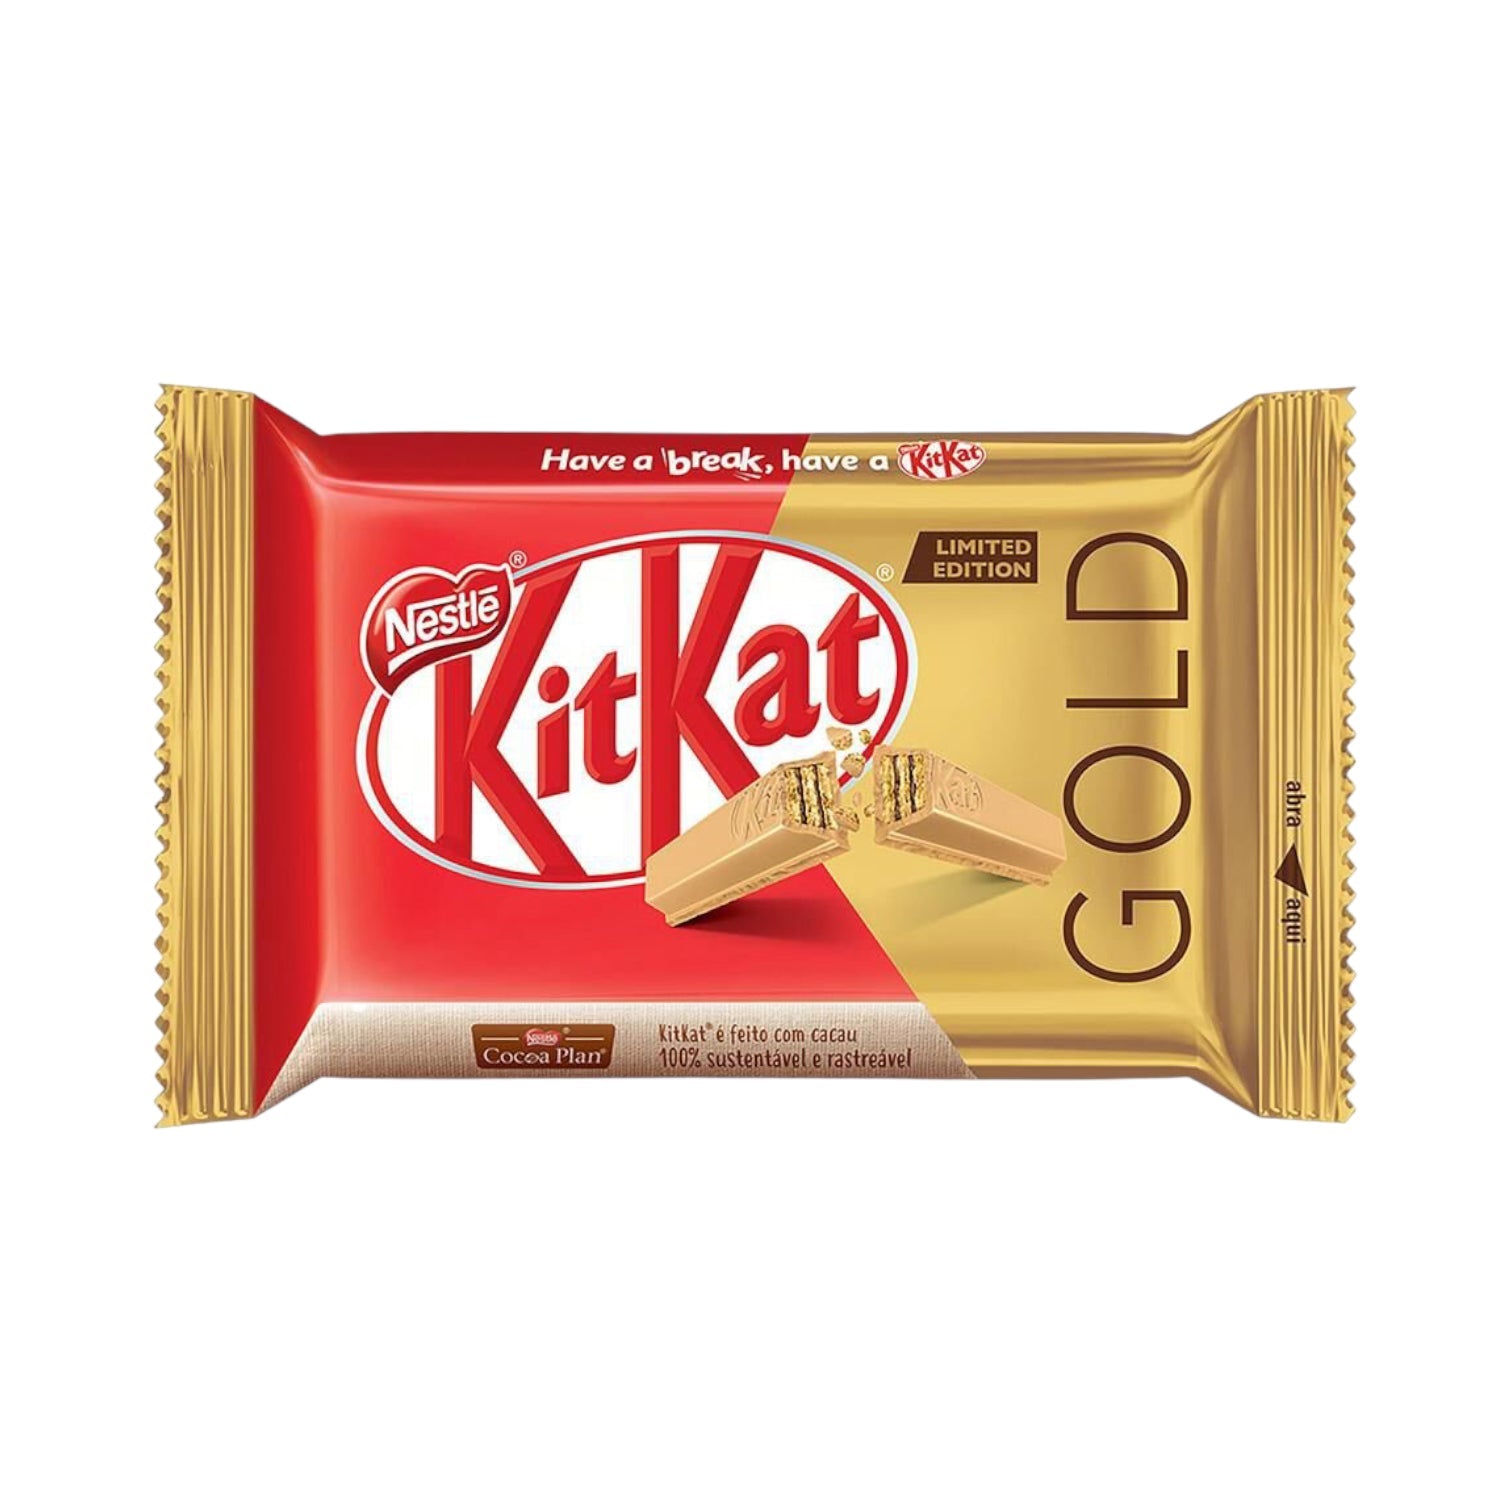 Why Everyone Loves Rare Kit Kats in Beaumont Fort Saskatchewan And You Should Look For It Too?